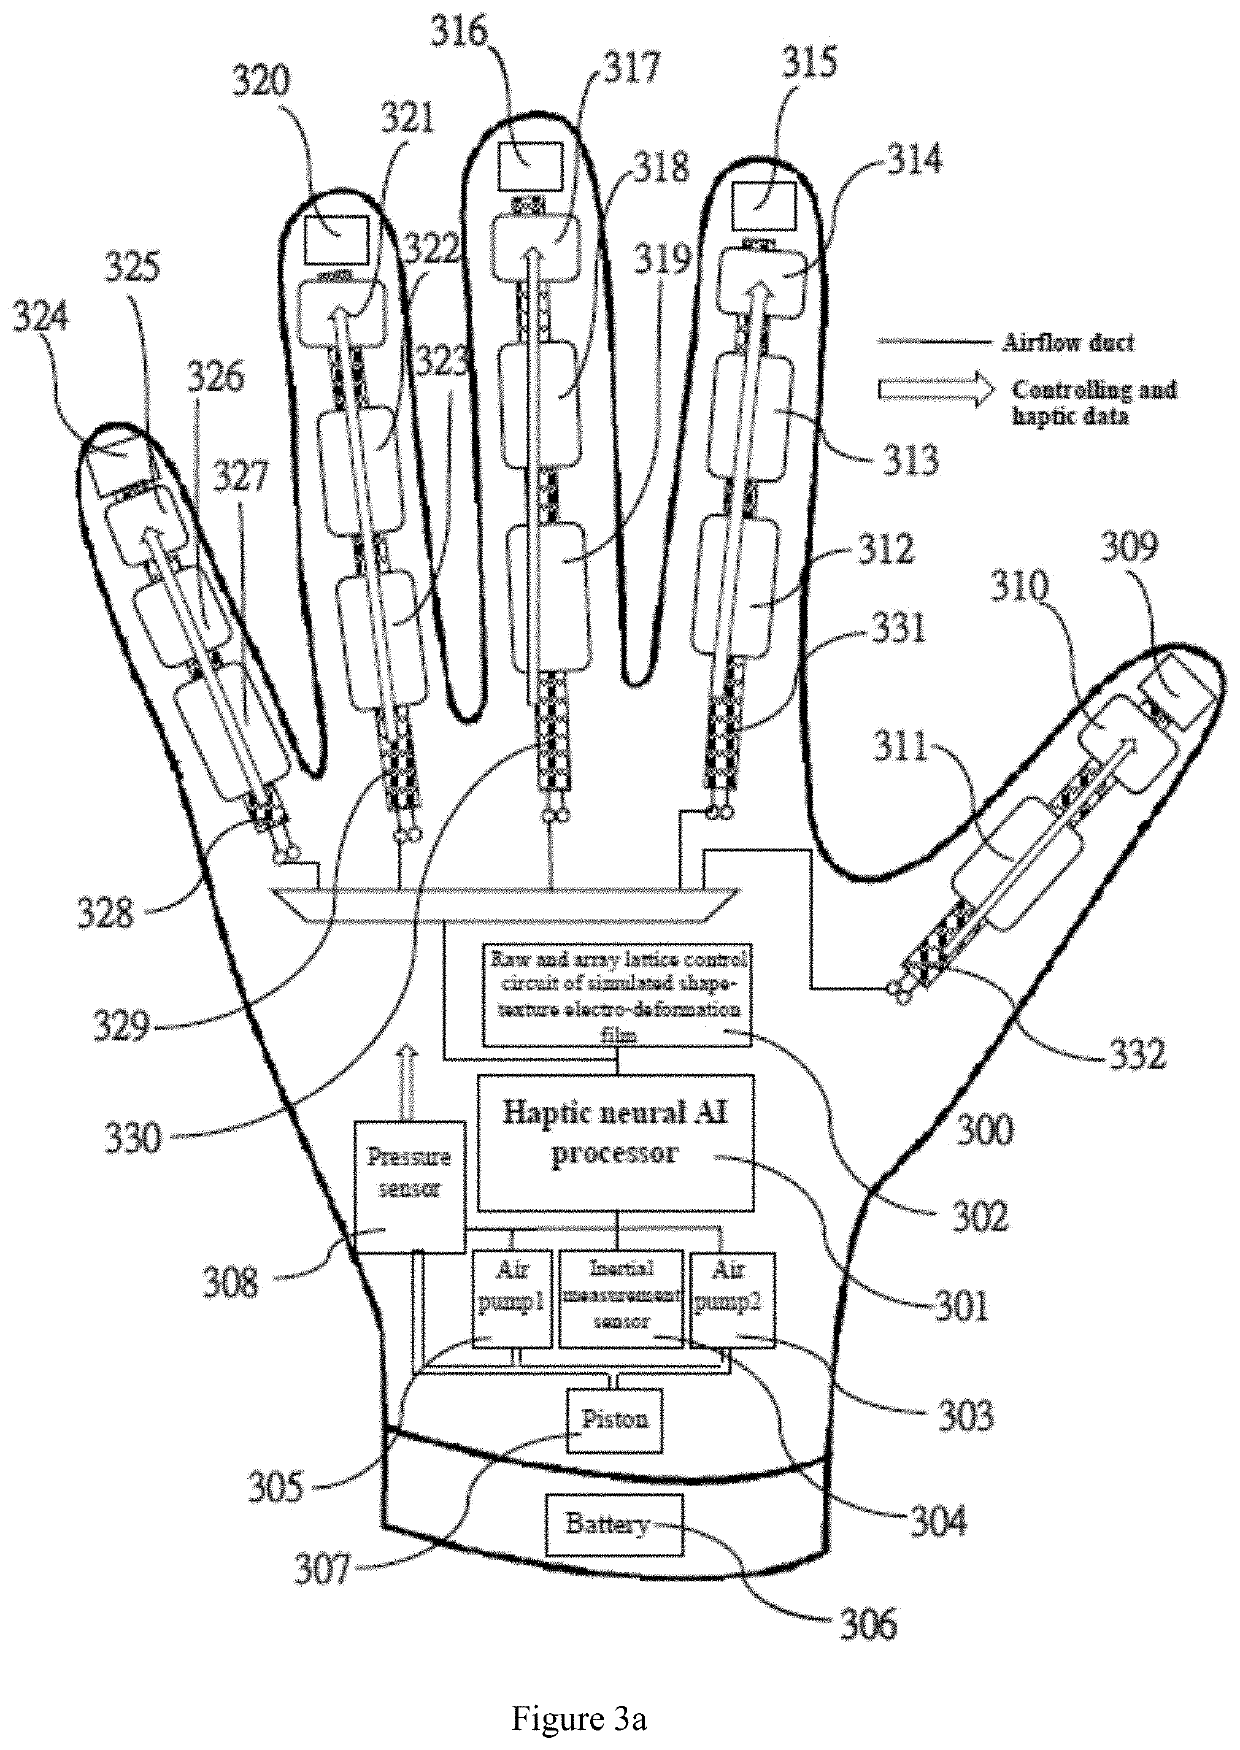 Virtual Reality Input and Haptic Feedback System